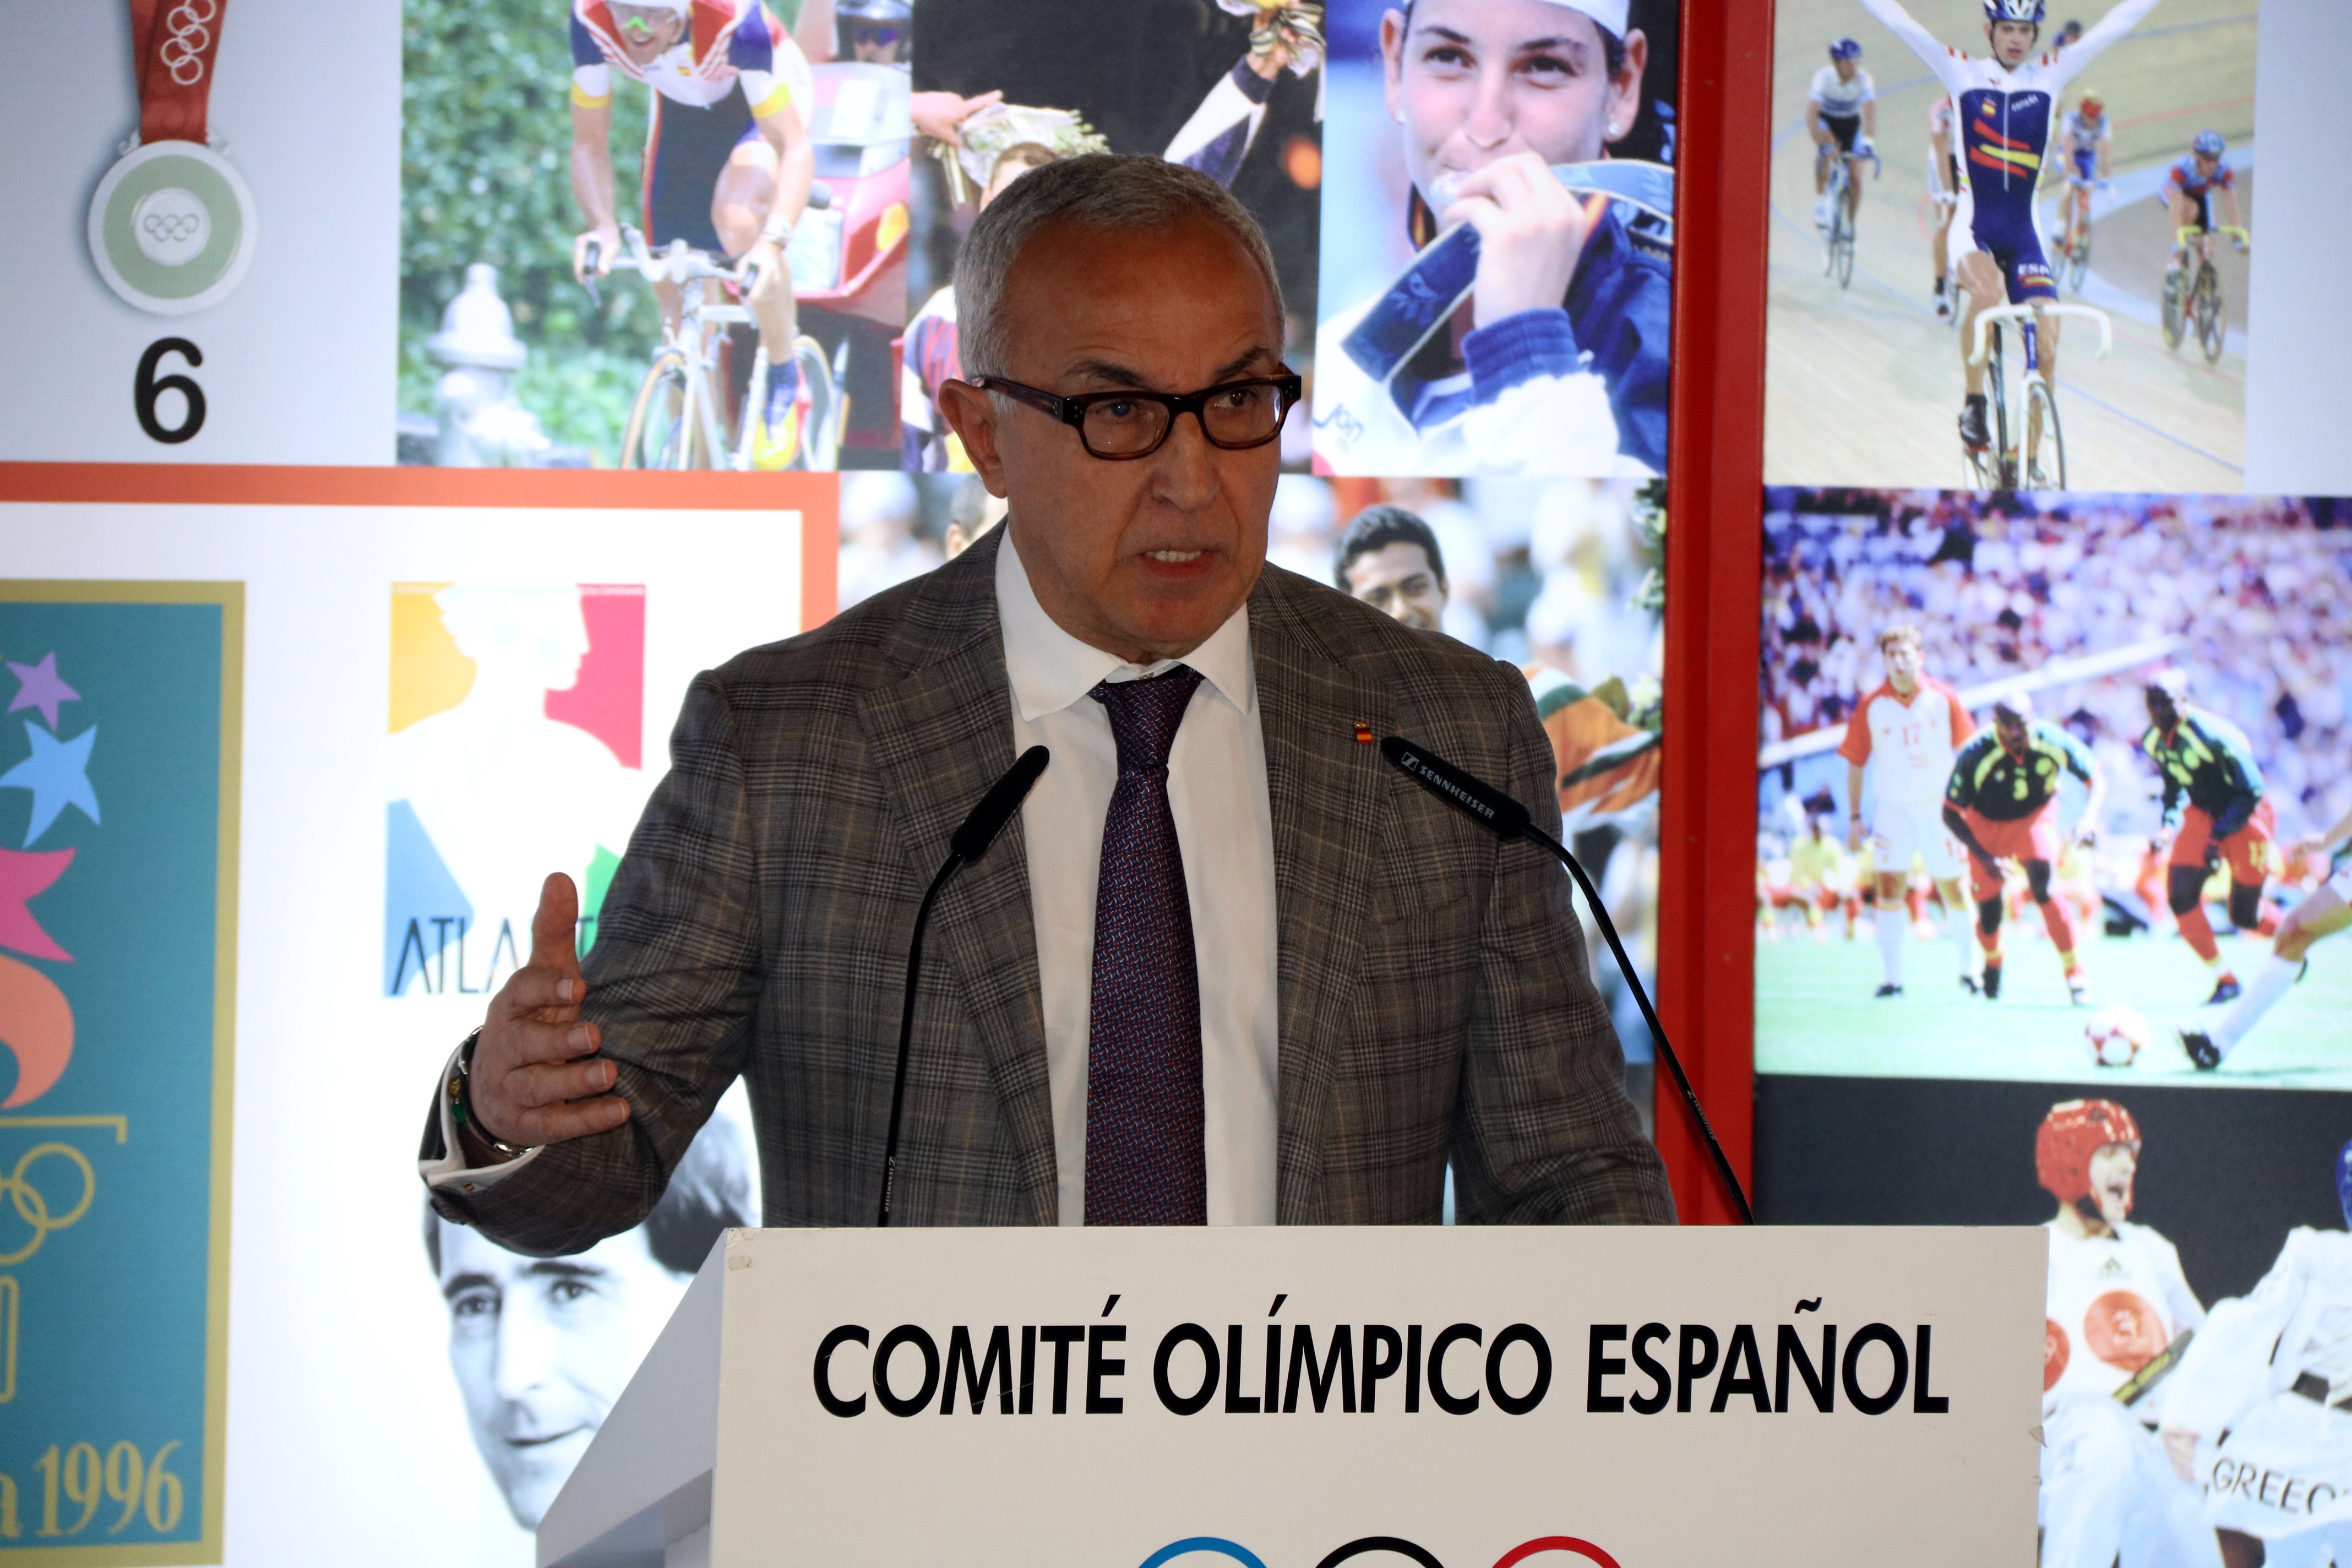 Spanish Olympic head criticises Aragon's stance and reopens Pyrenean games bid